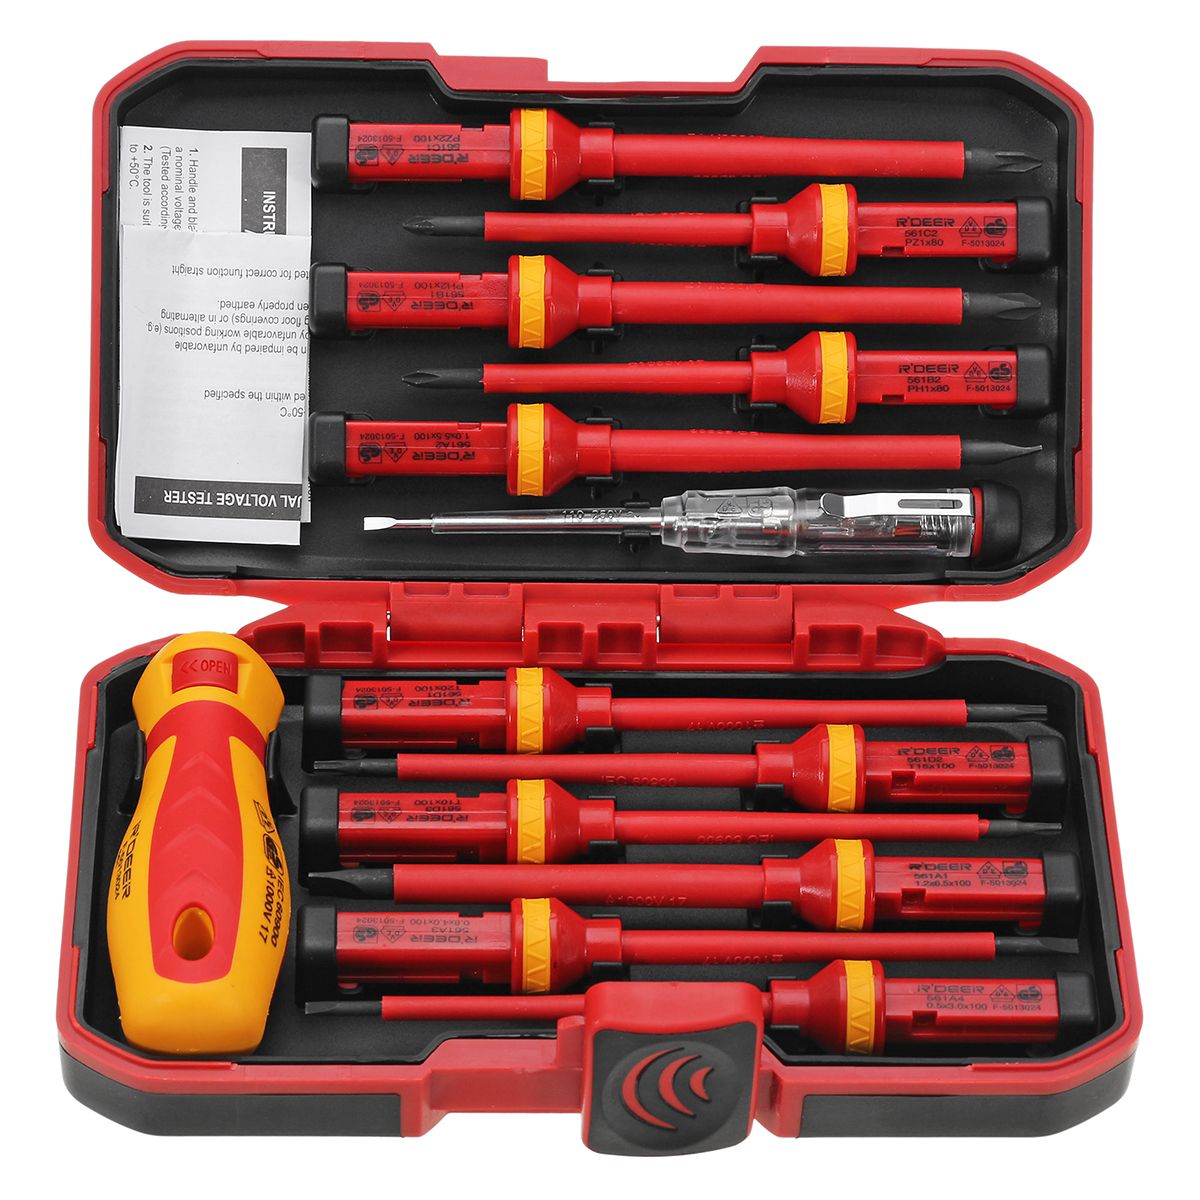 13Pcs-1000V-Electronic-Insulated-Screwdriver-Set-Phillips-Slotted-Torx-CR-V-Screwdriver-Hand-Tools-1224521